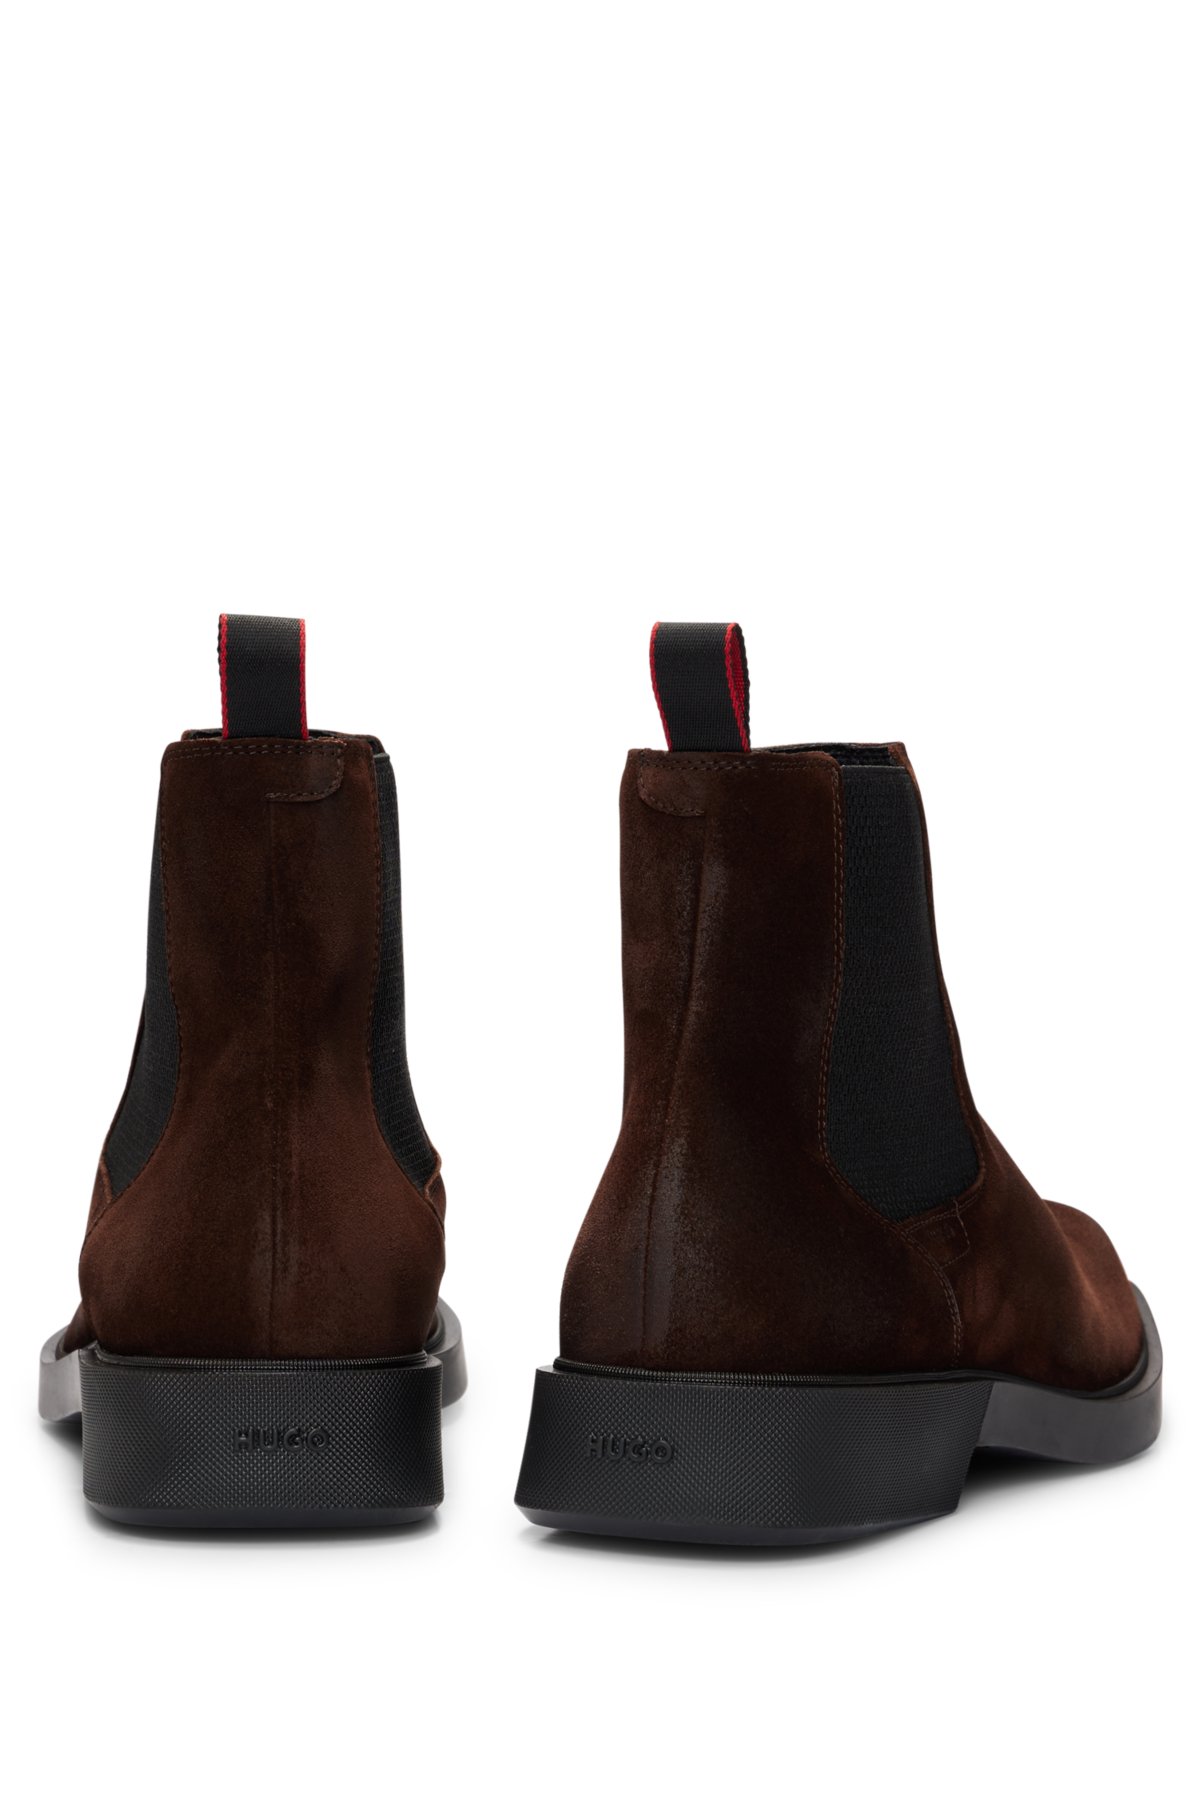 Square-toe Chelsea boots in suede with signature details, Dark Brown